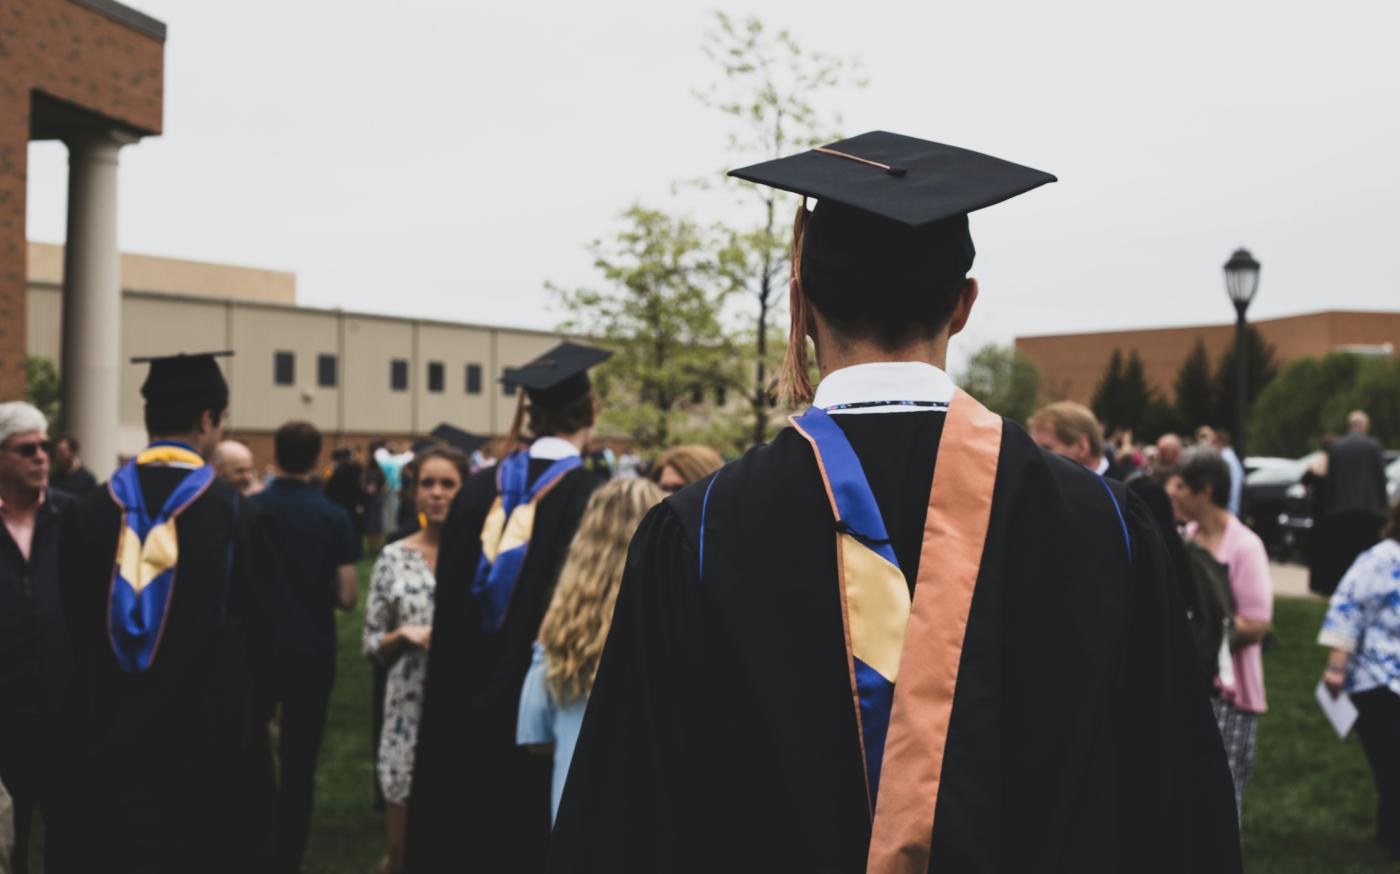 man wearing academic gown by Charles DeLoye courtesy of Unsplash.